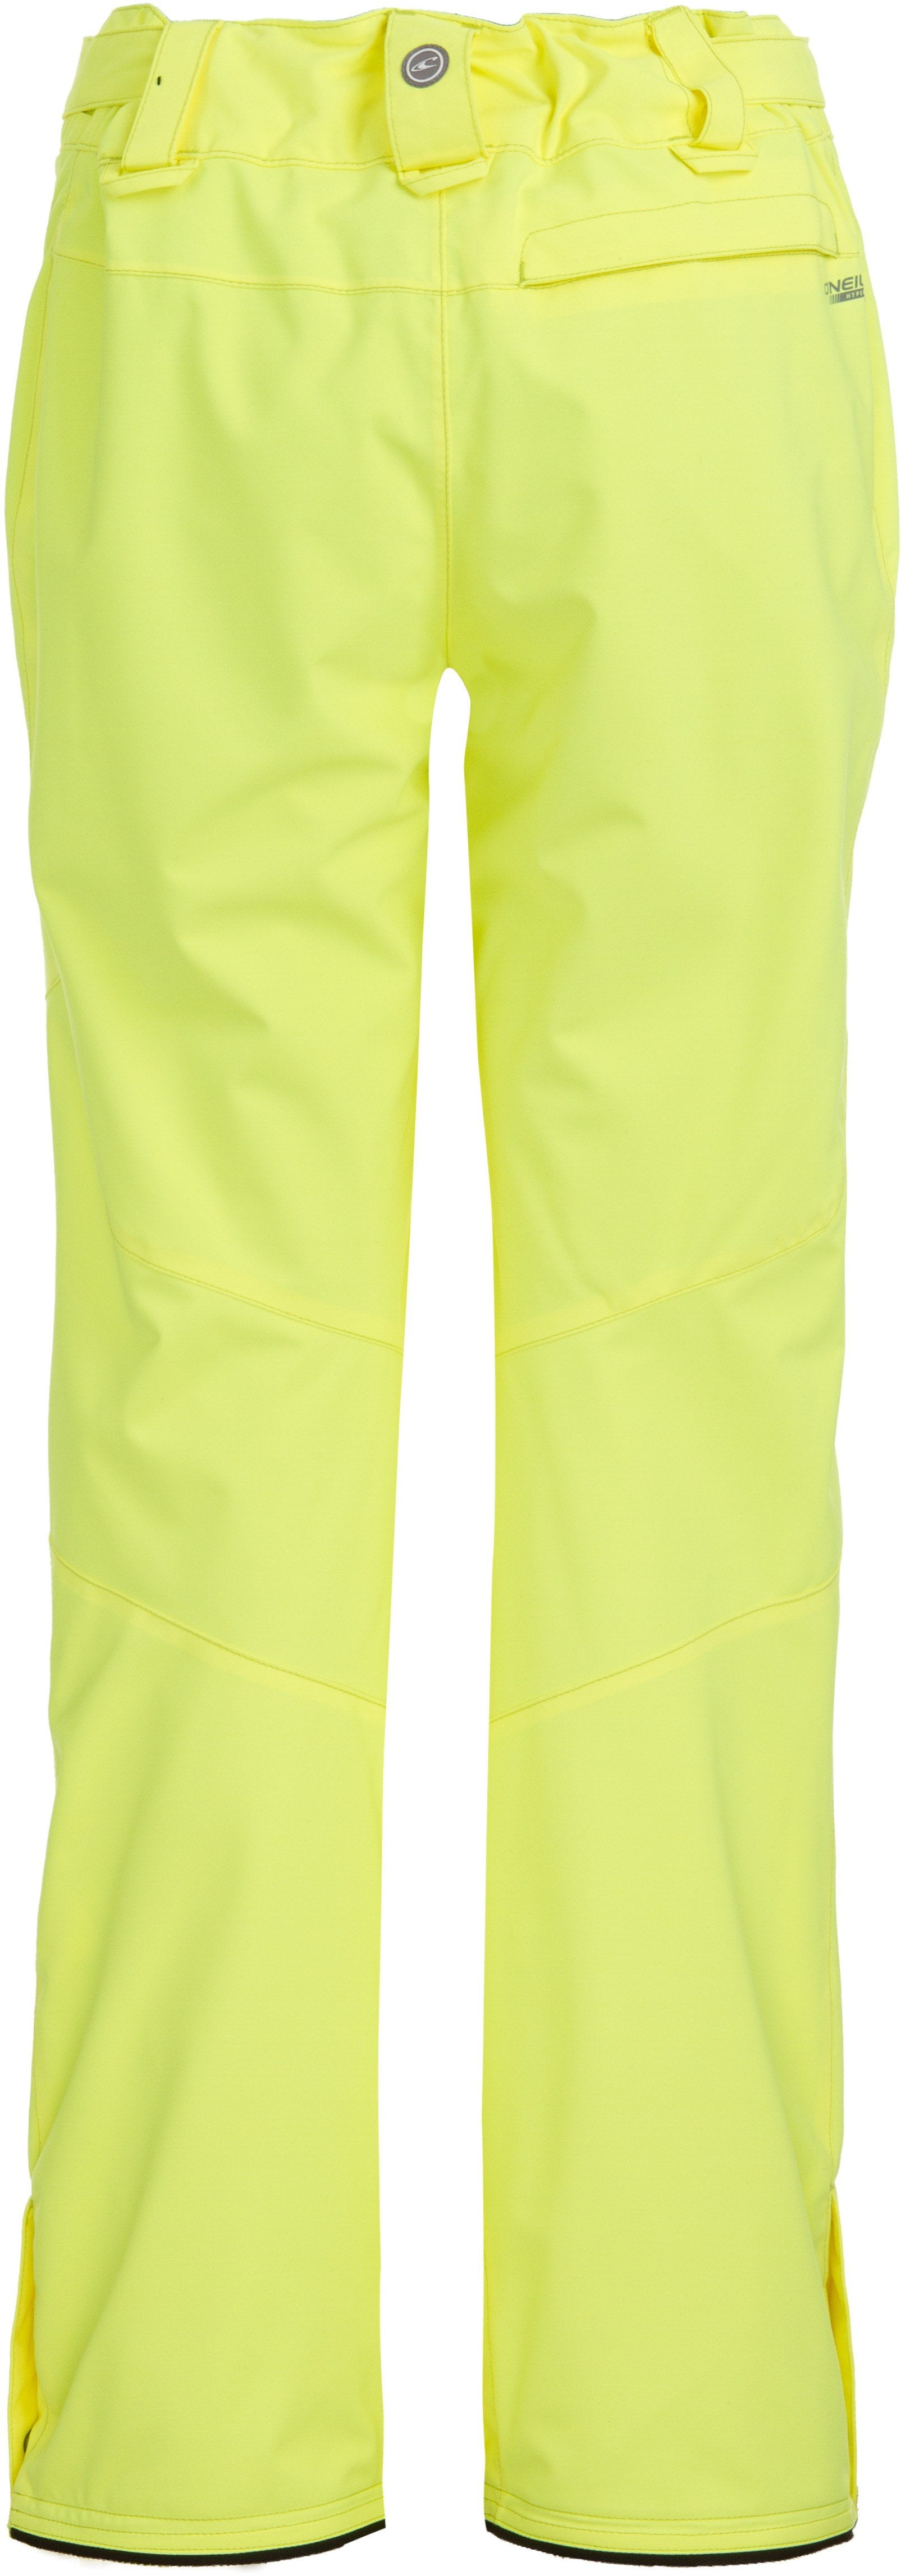 O'Neill Isolated Pants Star Insulated